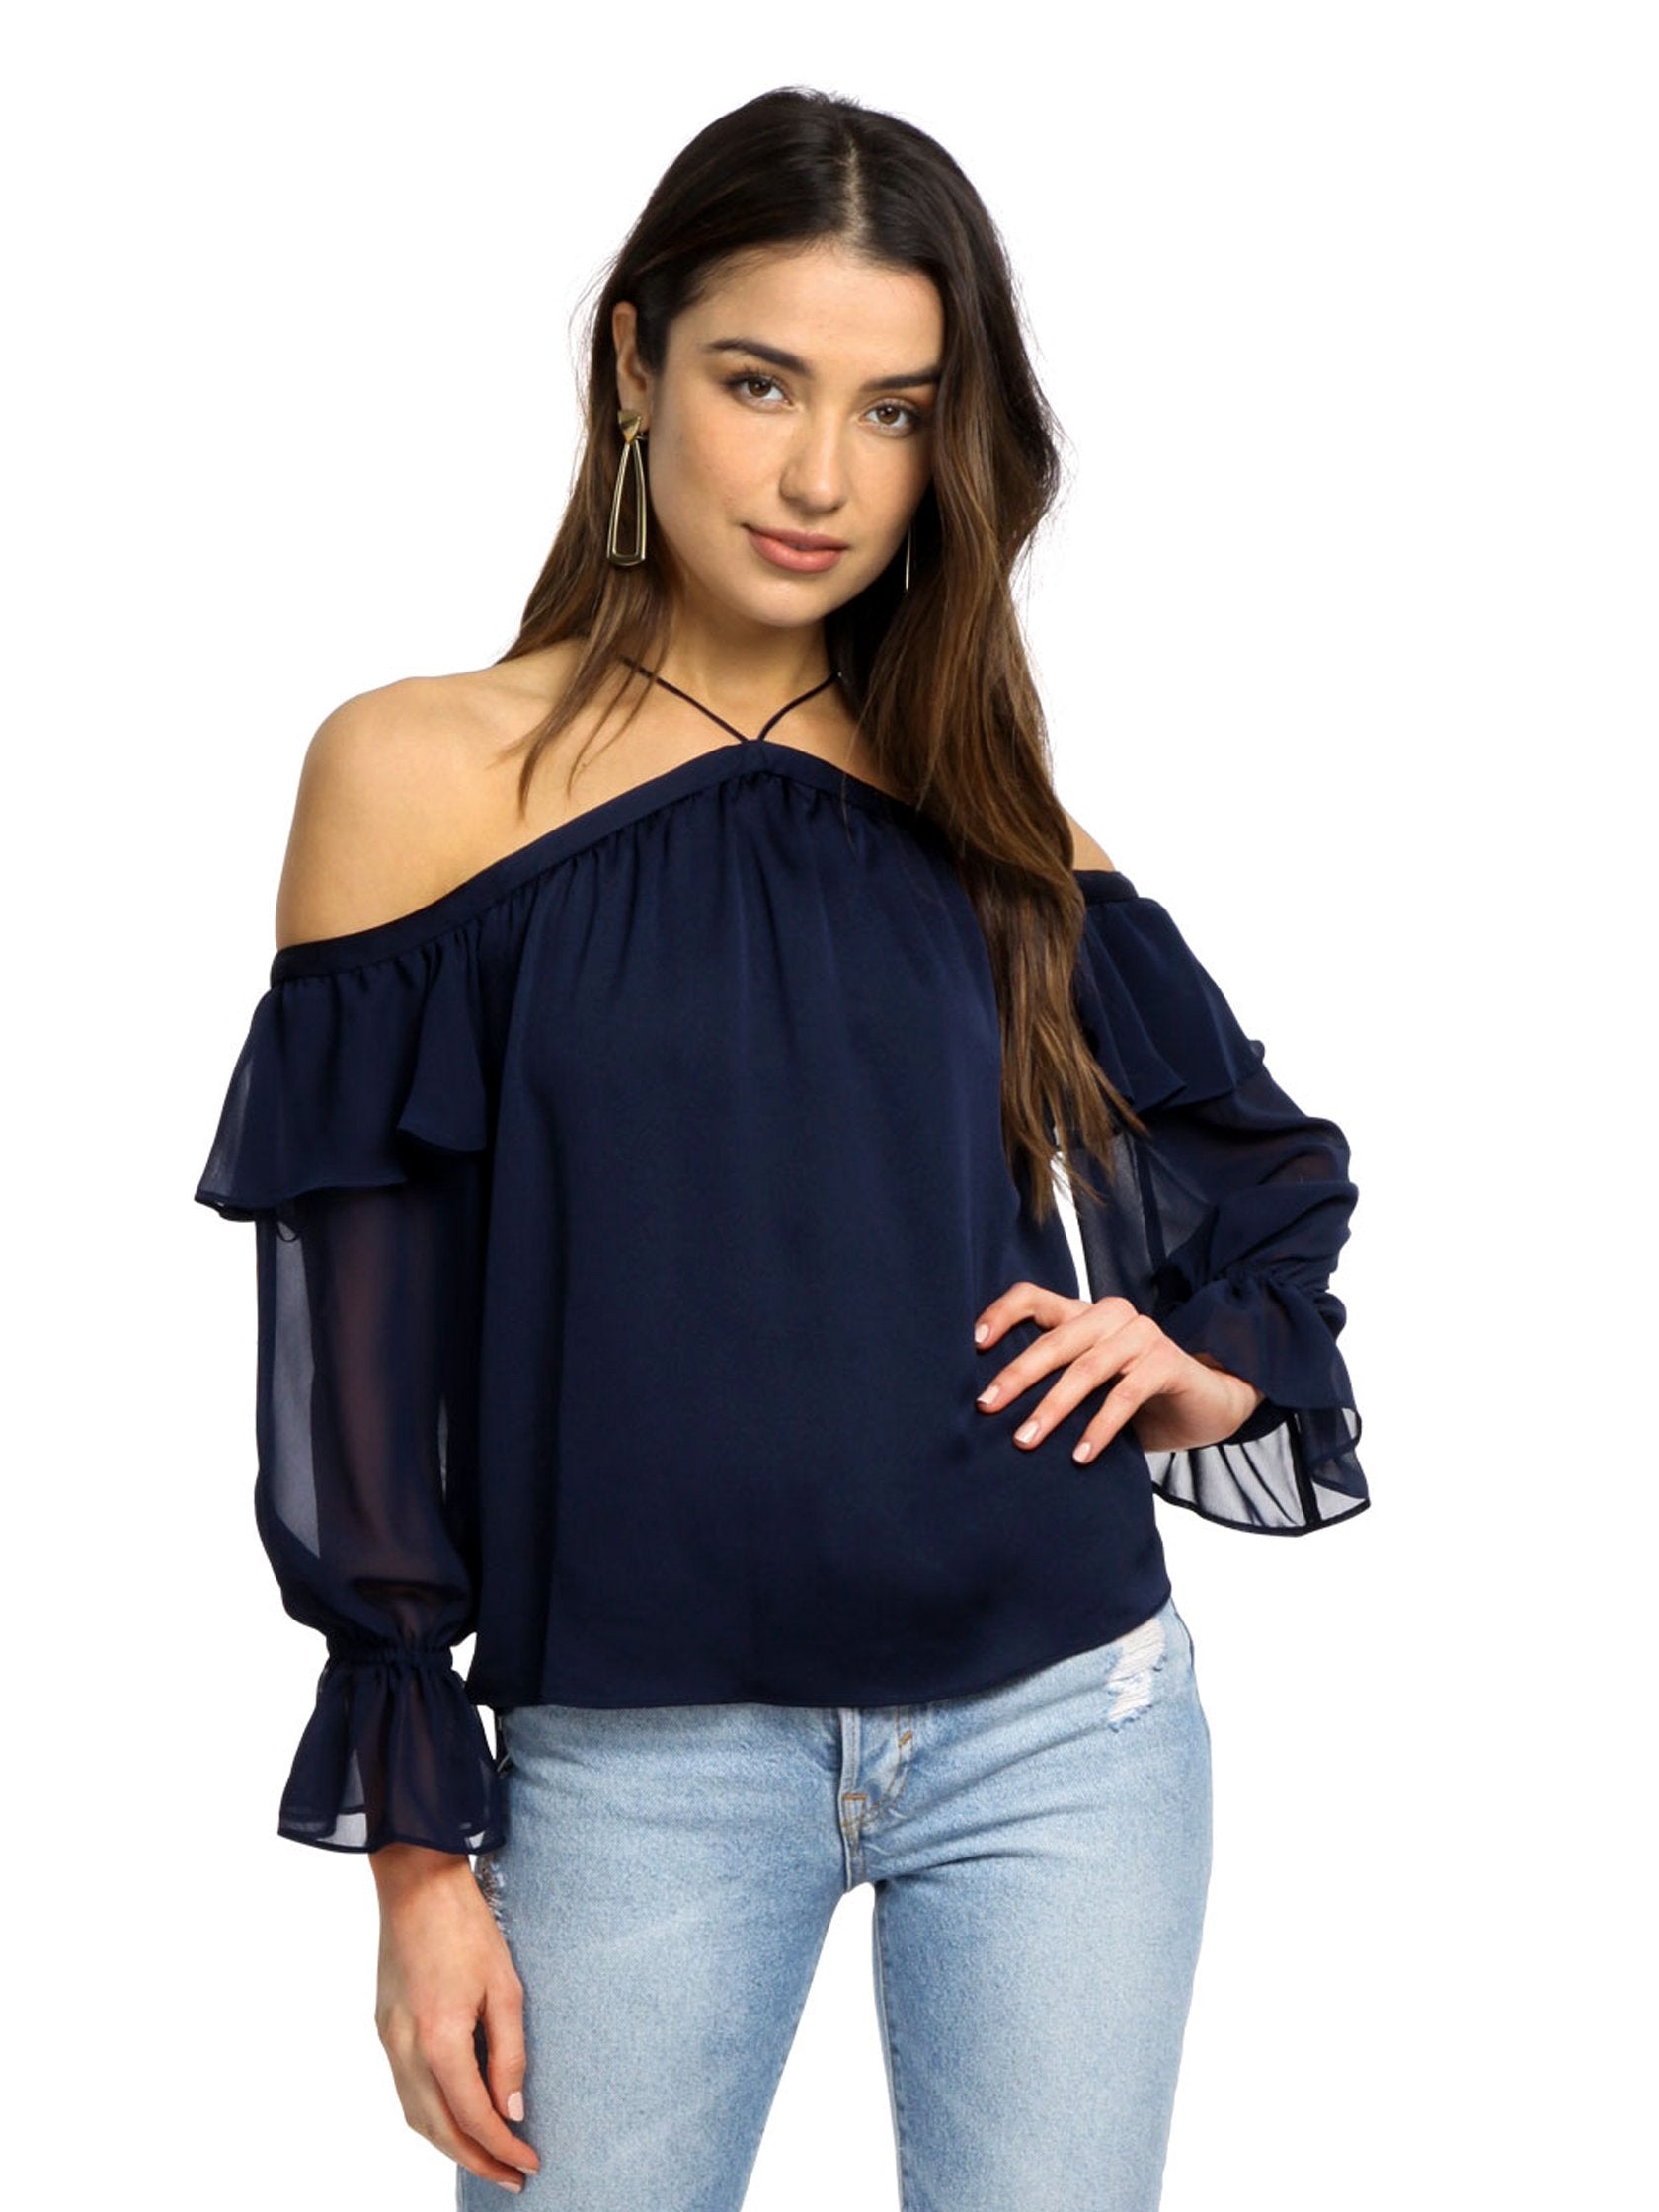 Woman wearing a top rental from 1.STATE called Cold Shoulder Halter Top